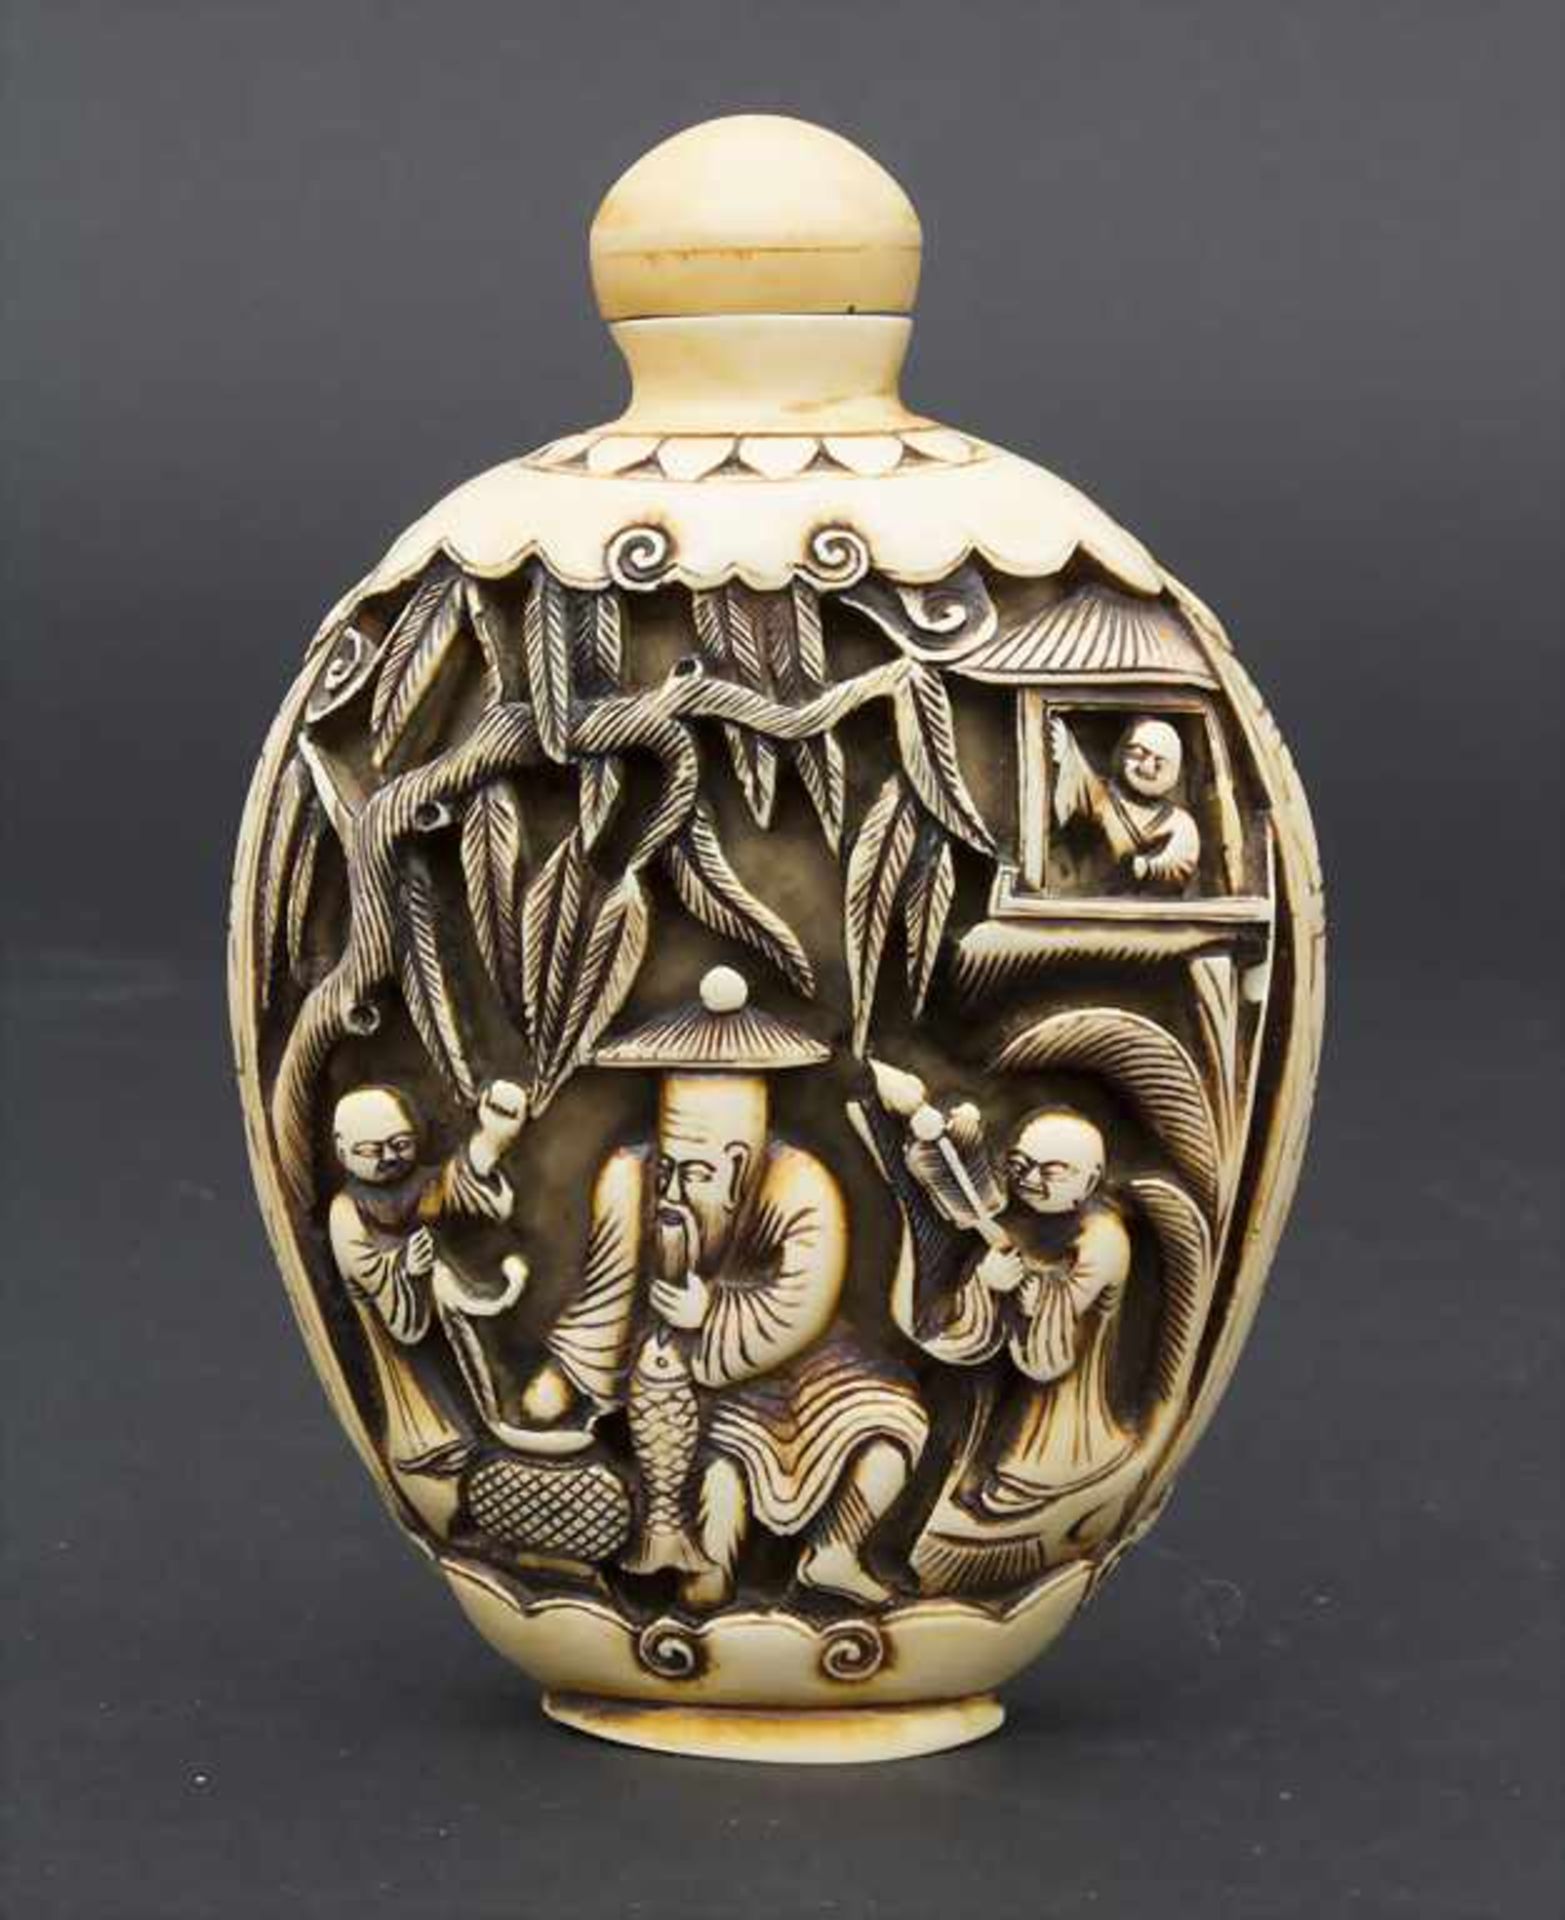 Snuffbottle mit Figurendekor / A snuff bottle with figural scenes, China, un 1900 - Image 3 of 7